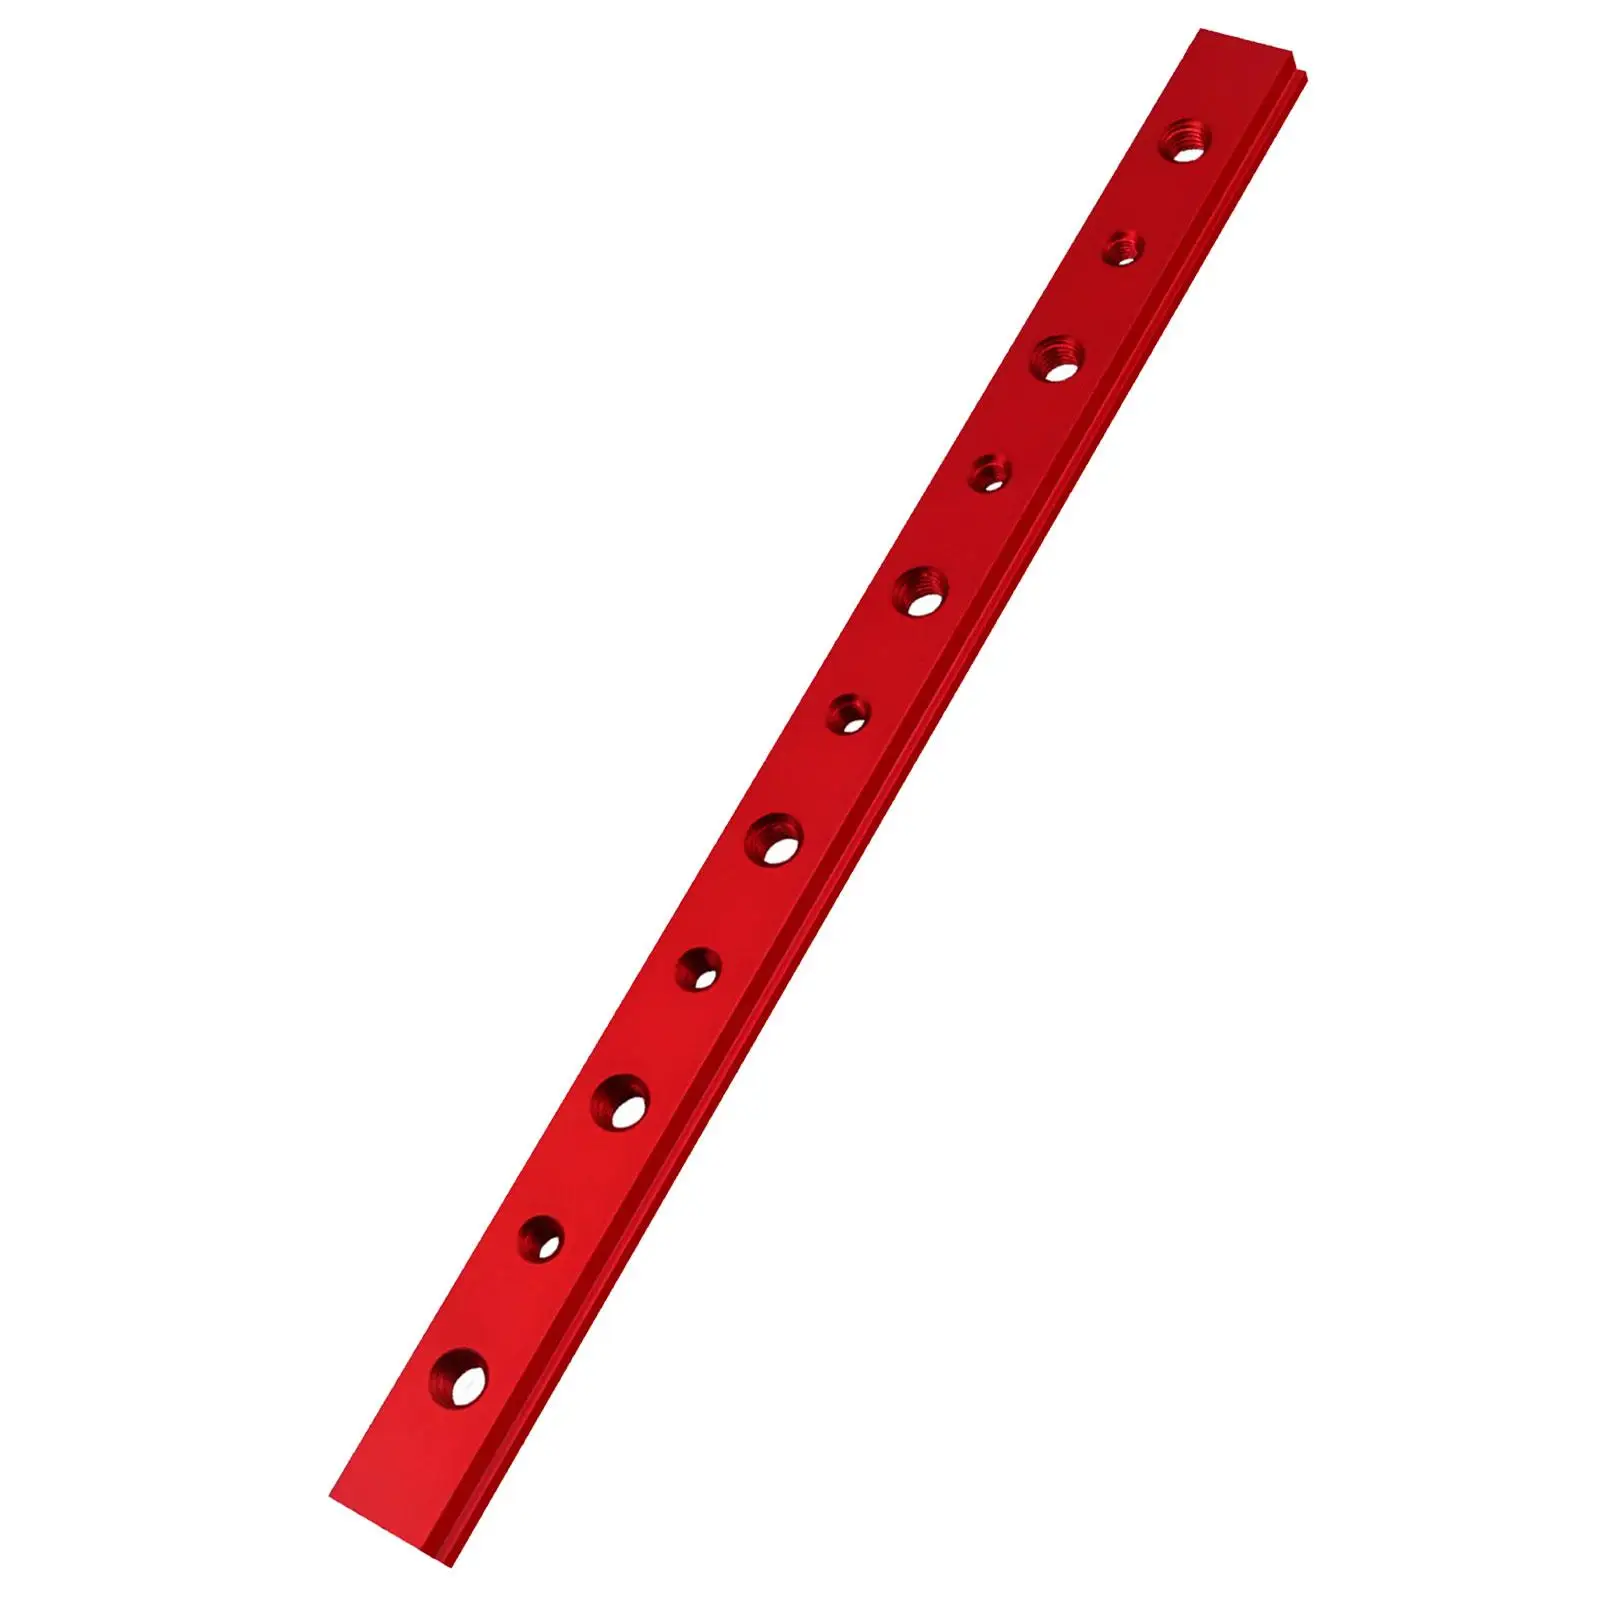 Aluminium Alloy Miter Bar for Tension Devices, Sledge Jig and Fixture Bar